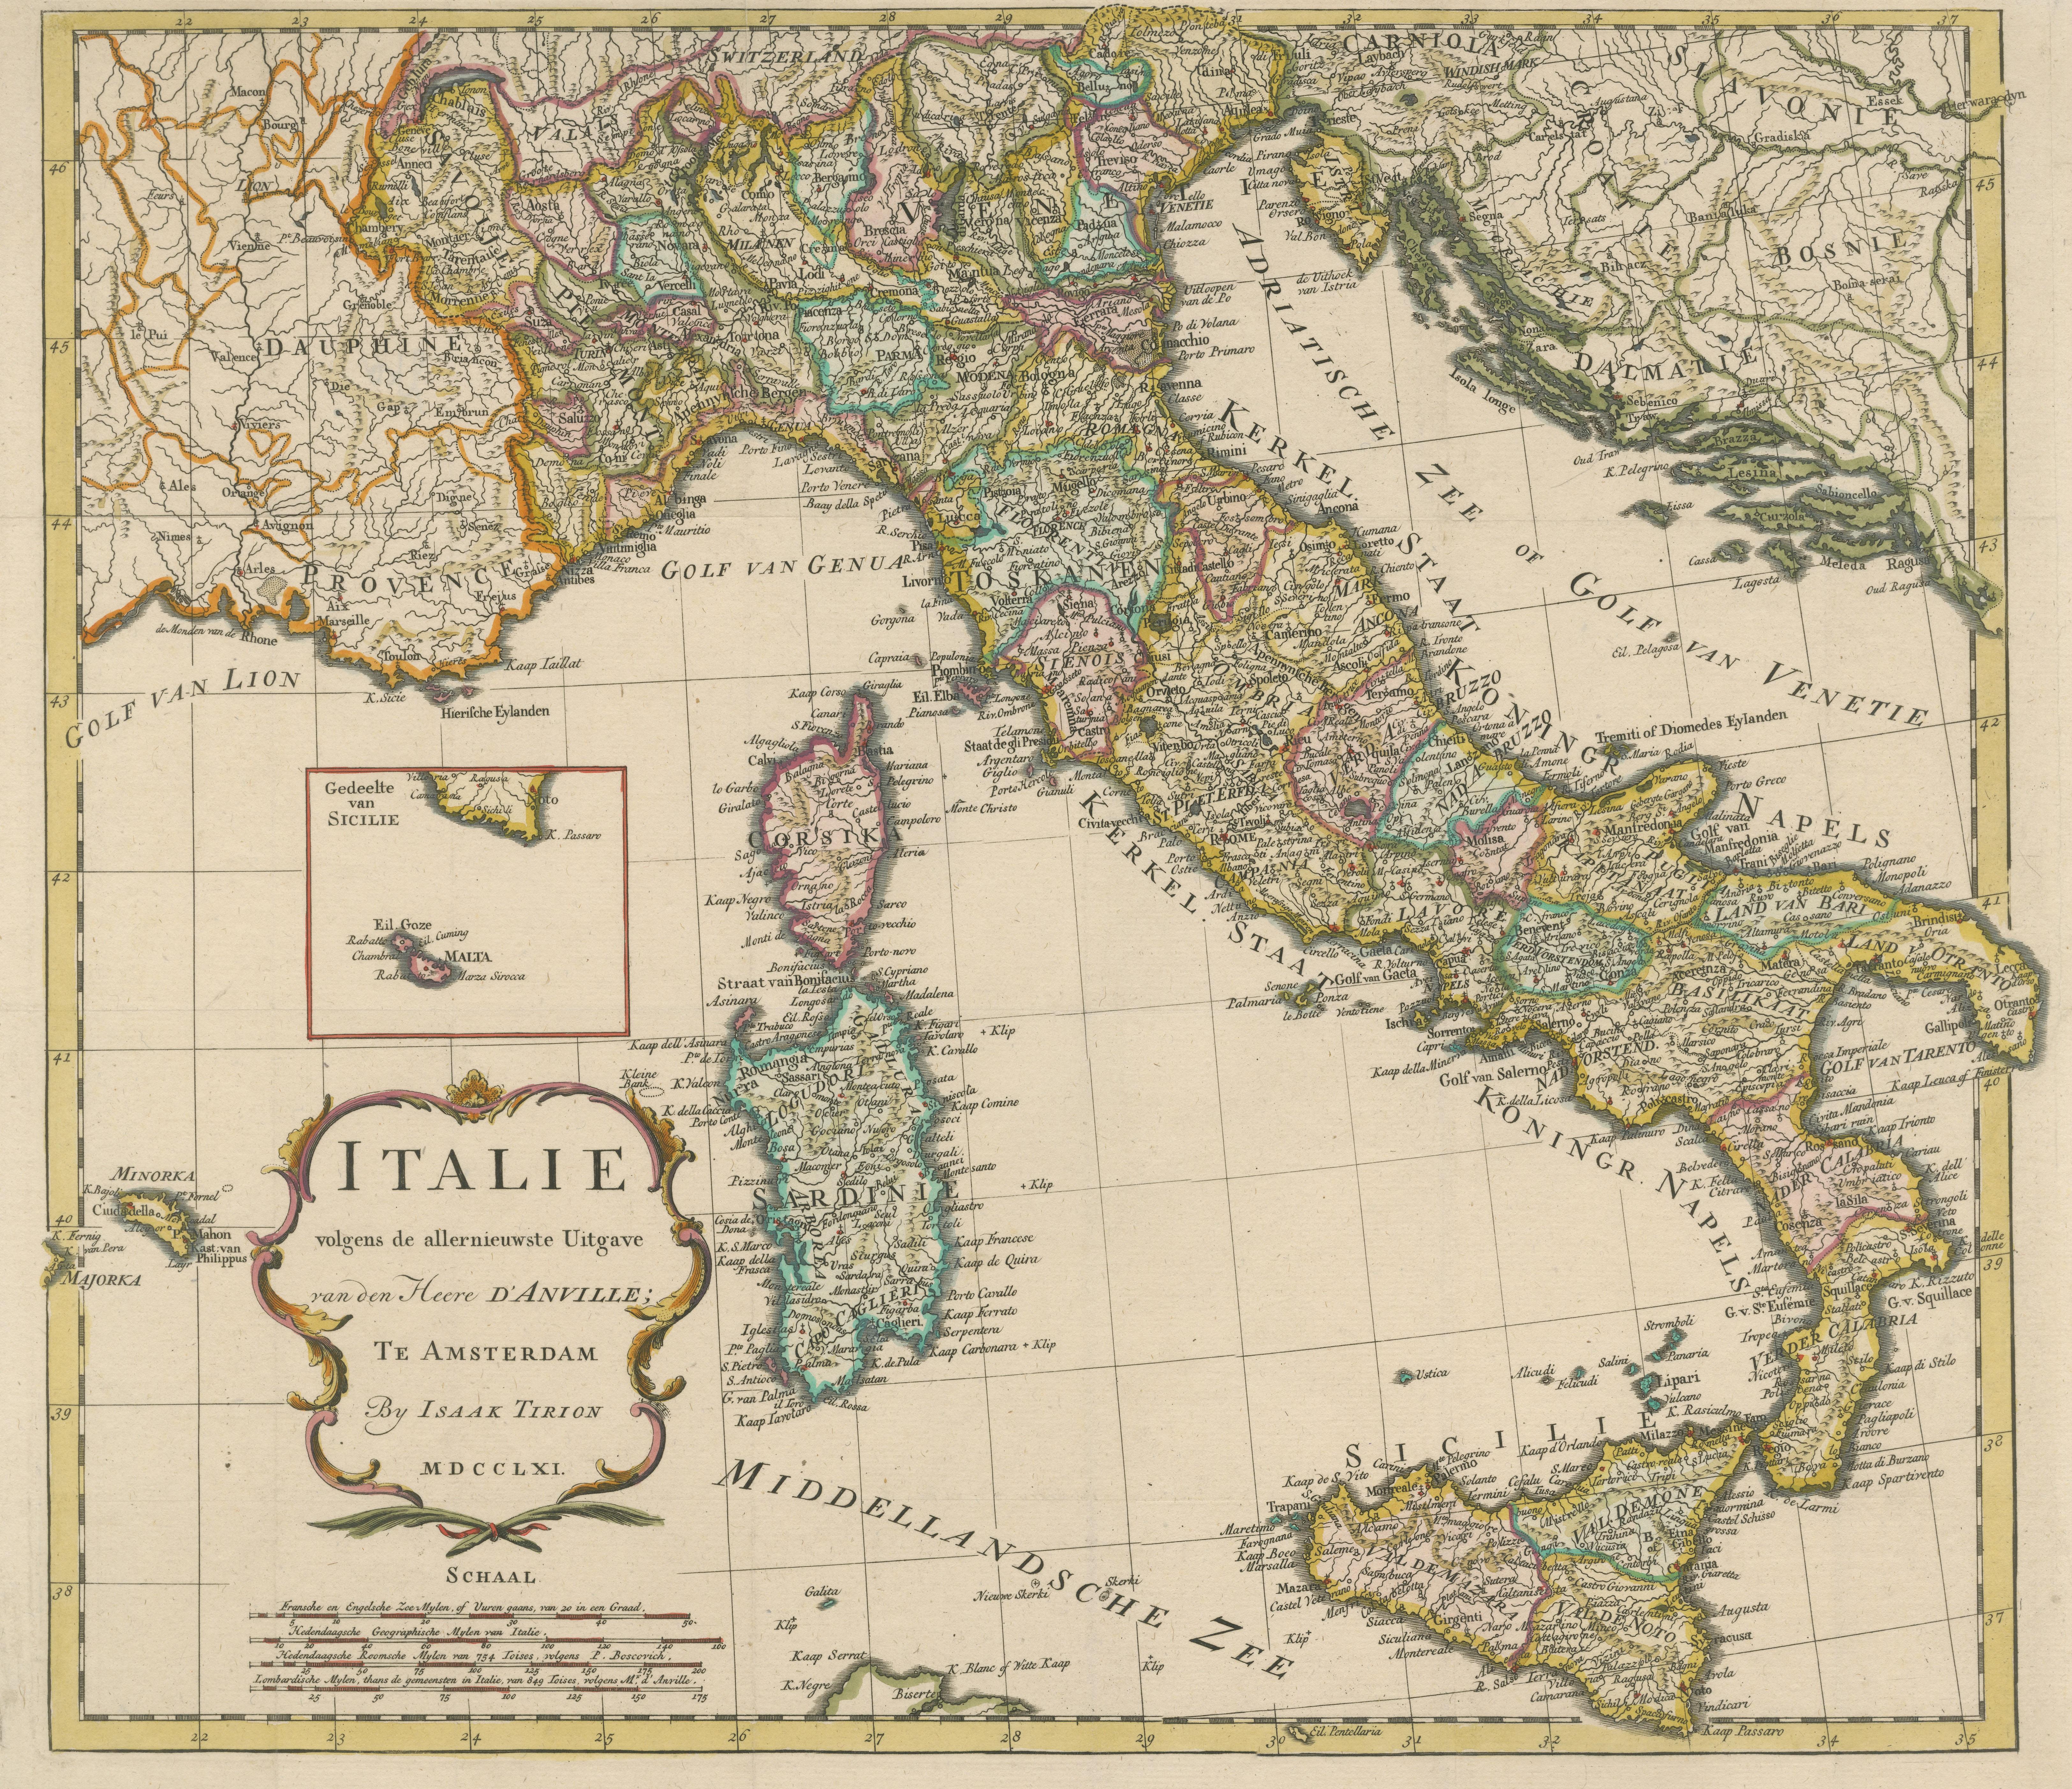 amsterdam to italy map